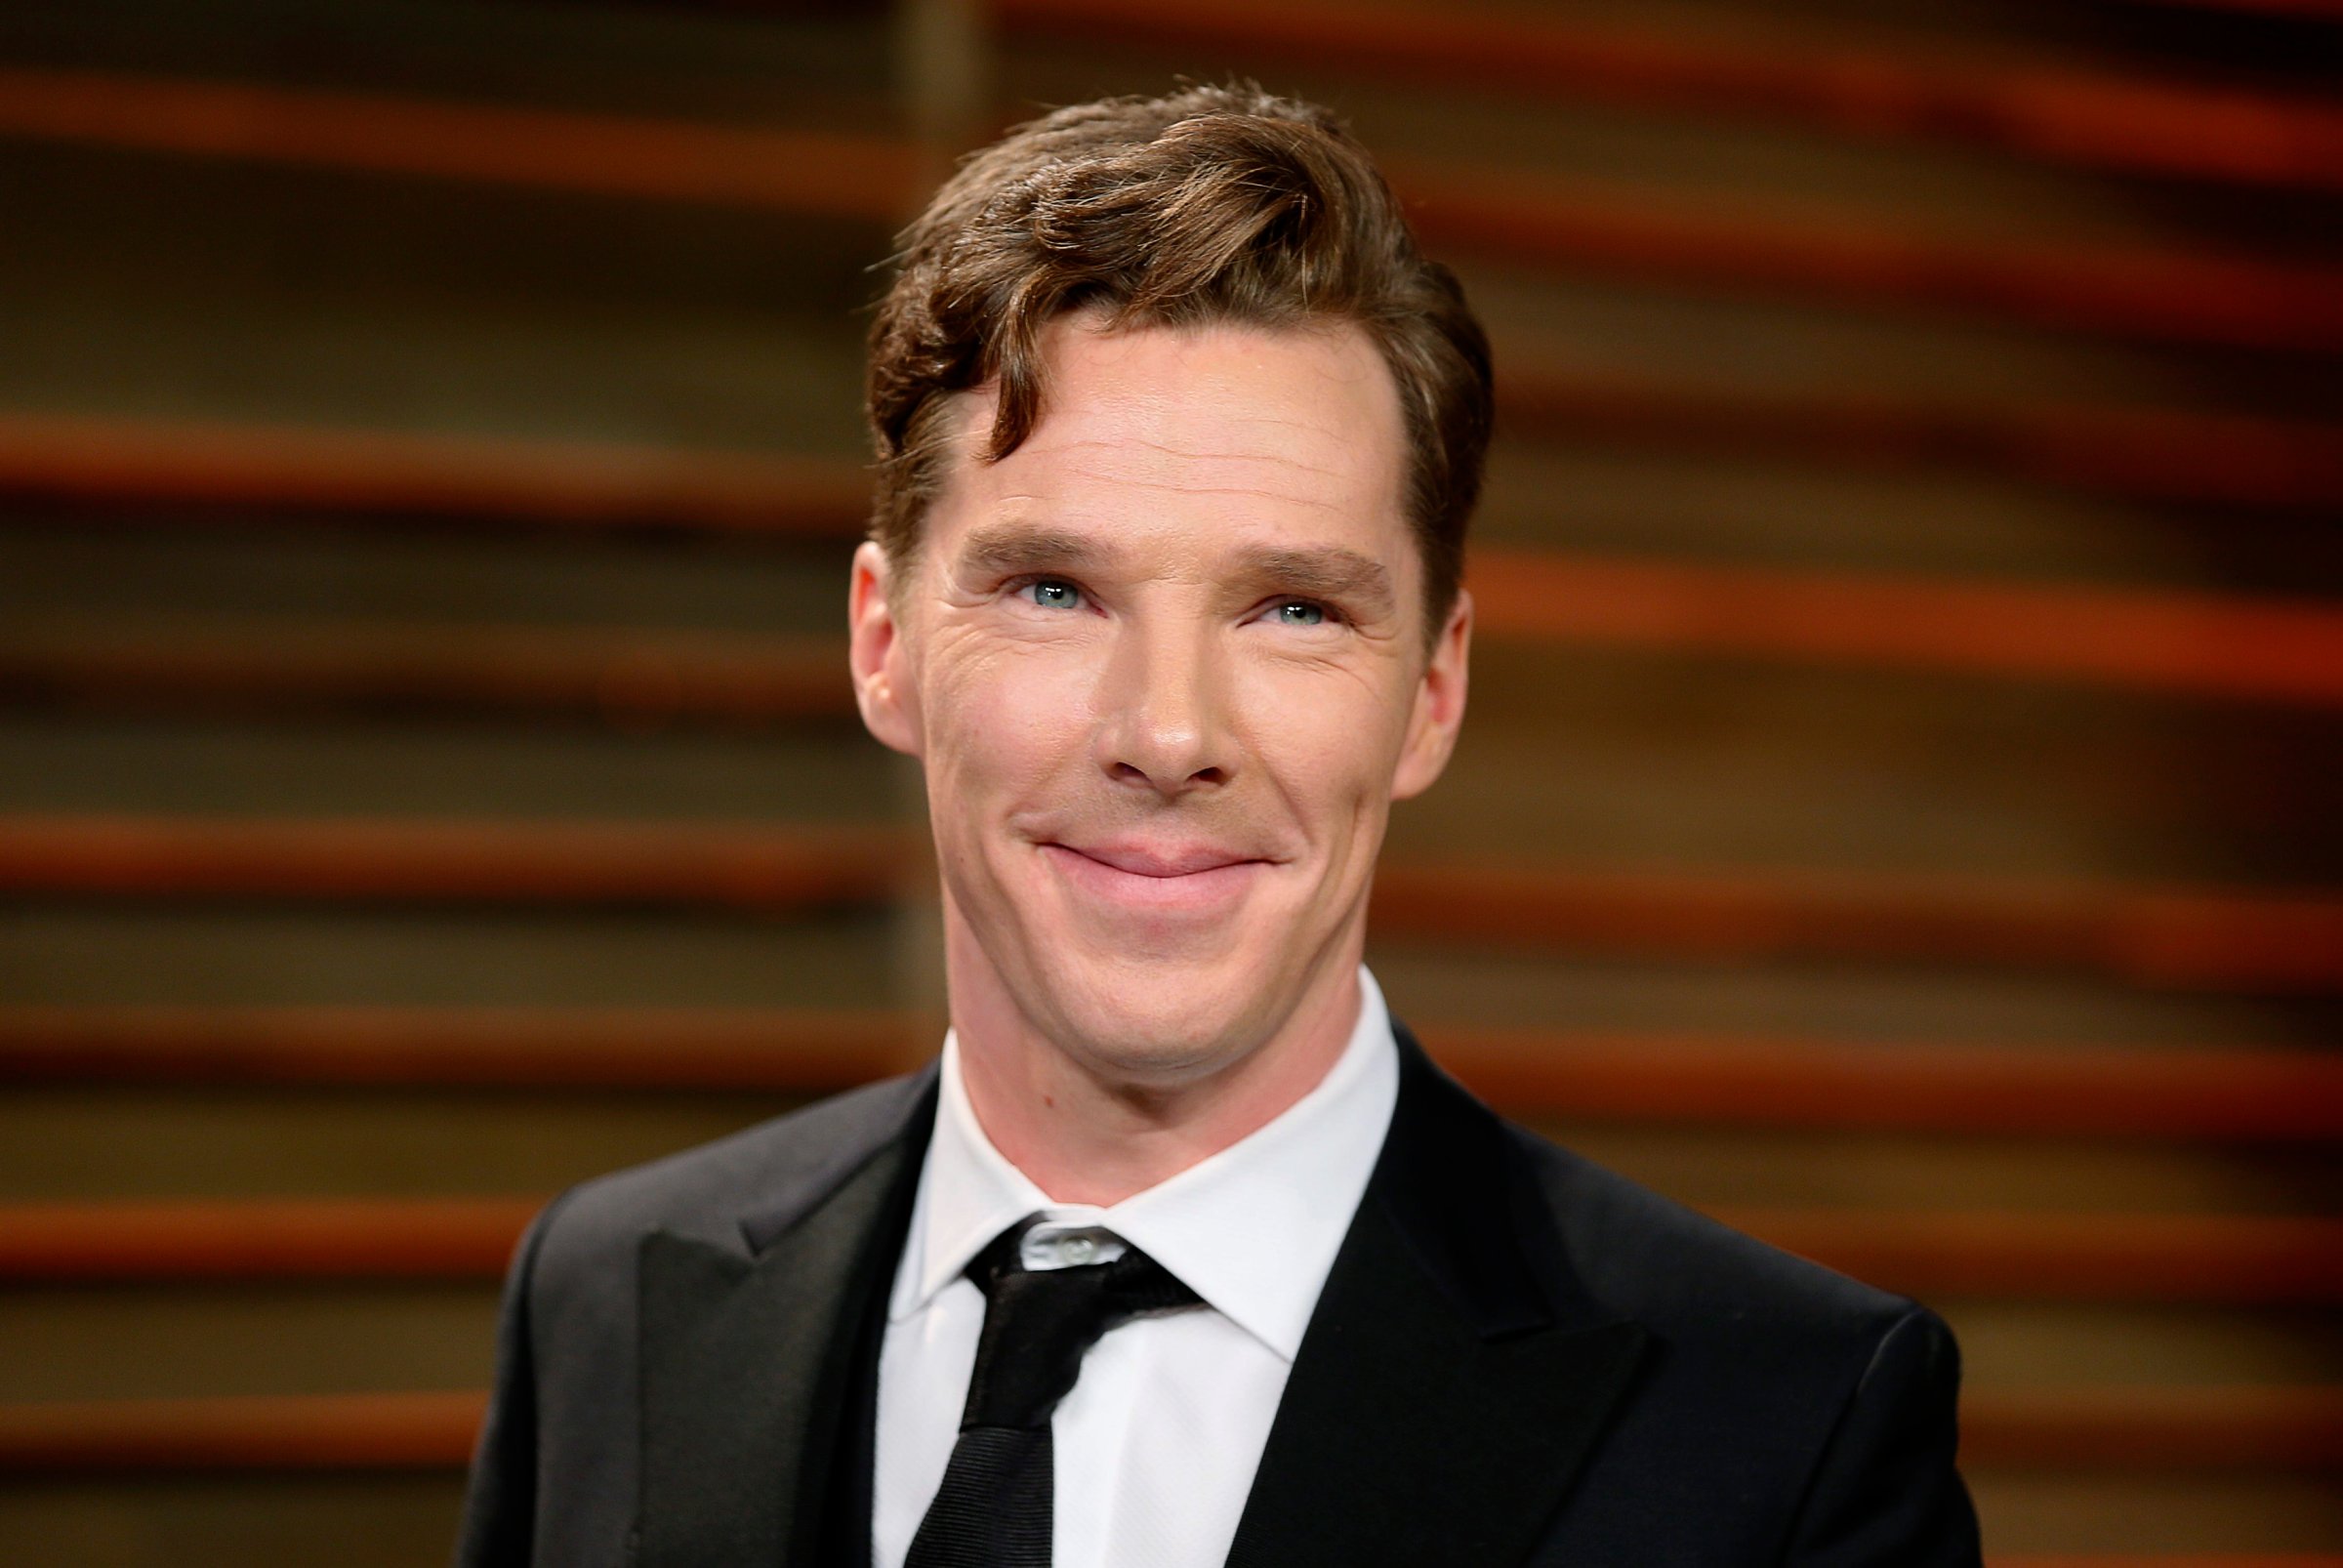 Benedict Cumberbatch arrives at the 2014 Vanity Fair Oscars Party in West Hollywood, on March 3, 2014.